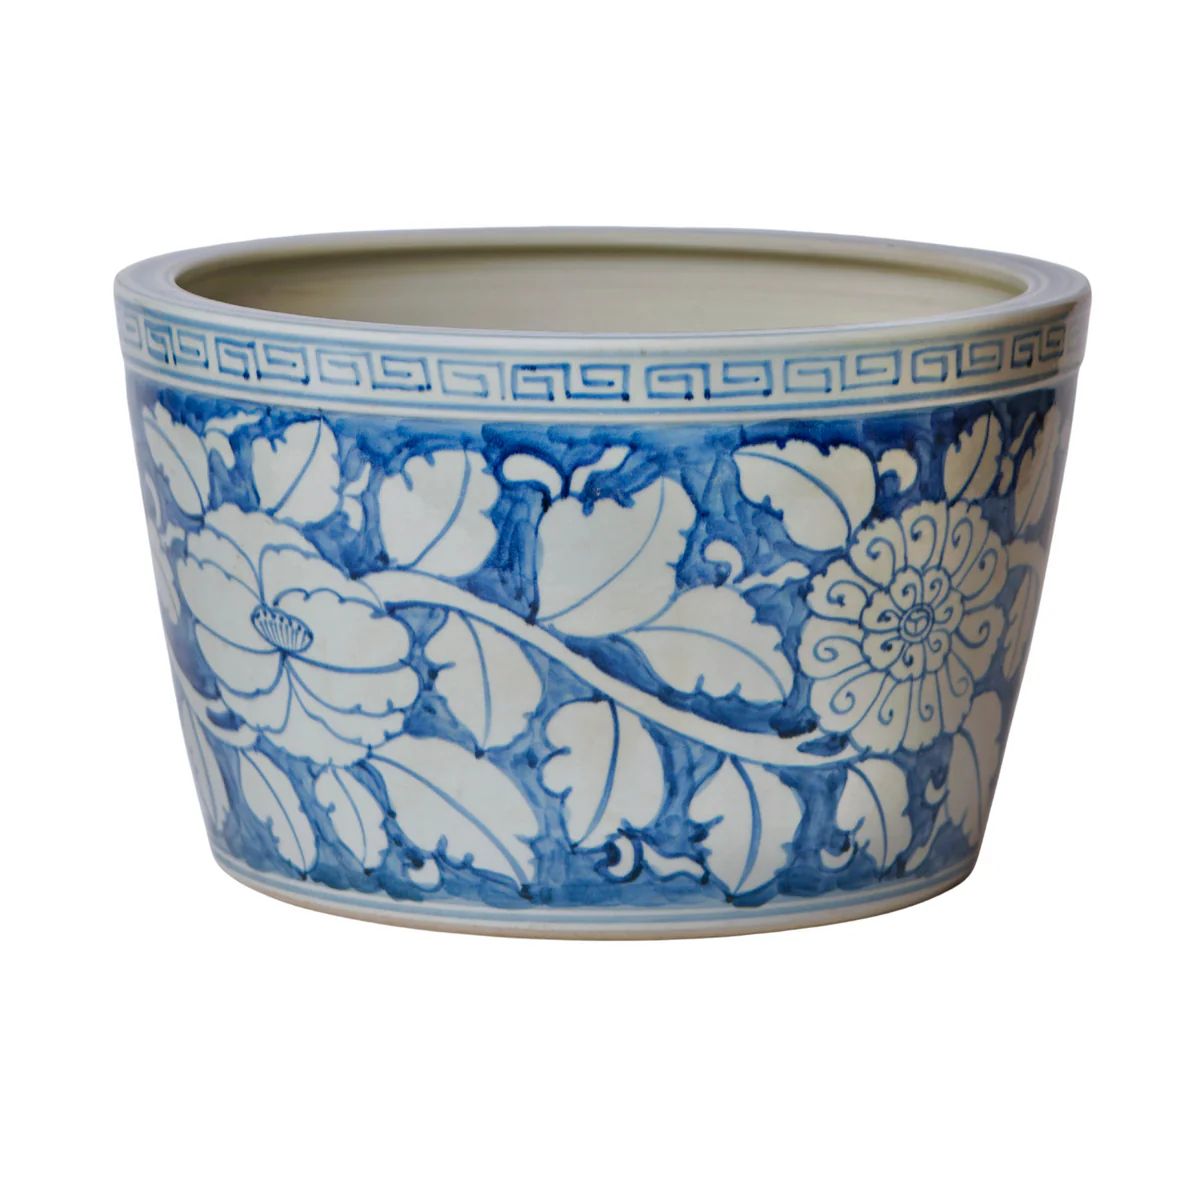 Blue and White Porcelain Peony Floral Planter | The Well Appointed House, LLC